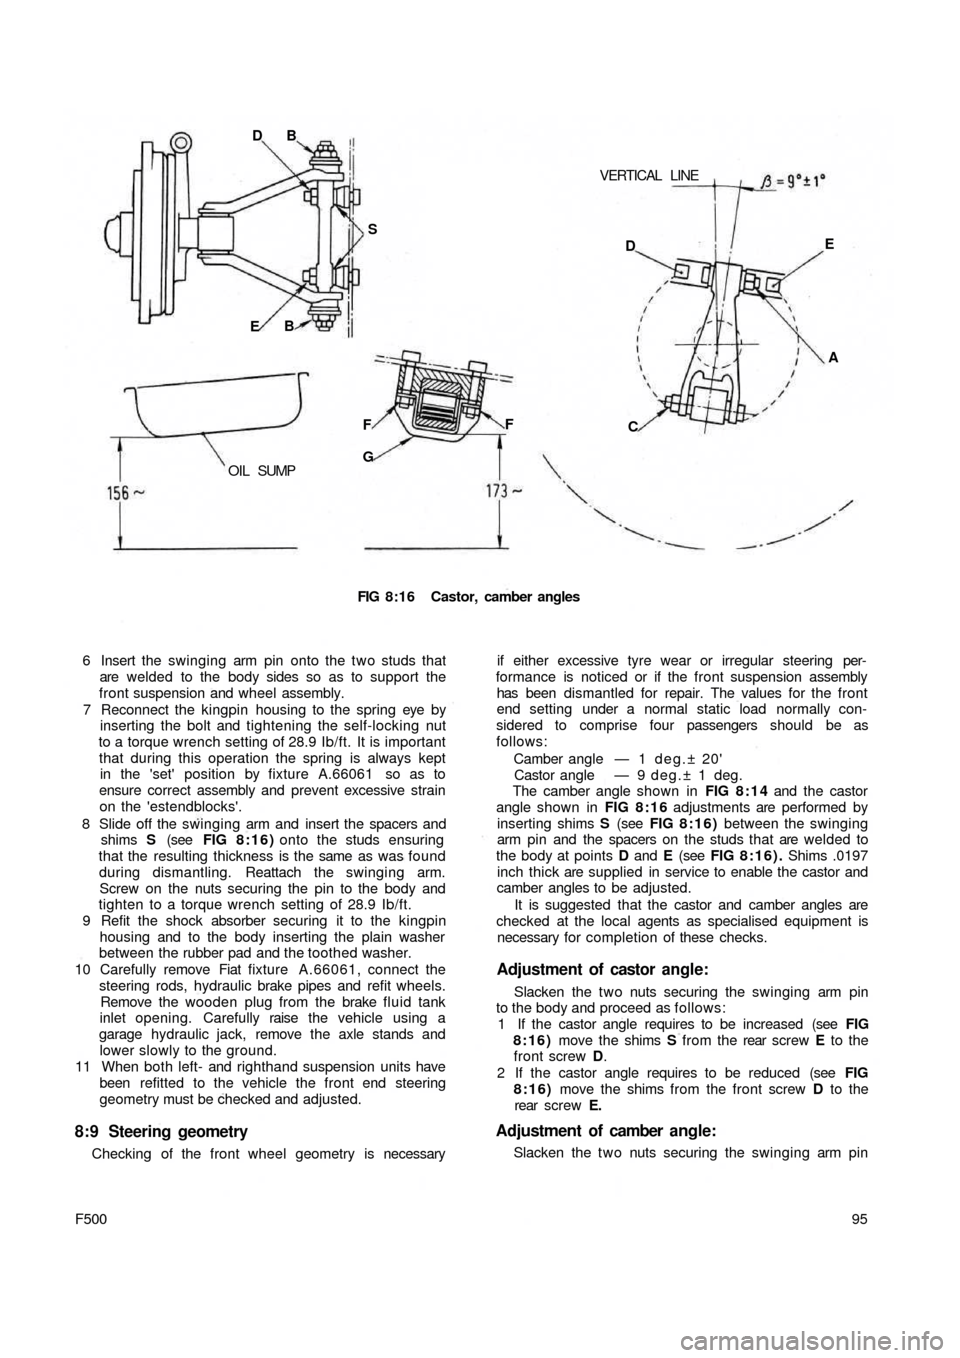 FIAT 500 1966 1.G Workshop Manual VERTICAL  LINE DB
S
EB
OIL  SUMPF
GF
FIG 8:16 Castor, camber angles
6 Insert the swinging arm pin onto the two studs that
are welded  to the  body sides so as to support the
front suspension and wheel